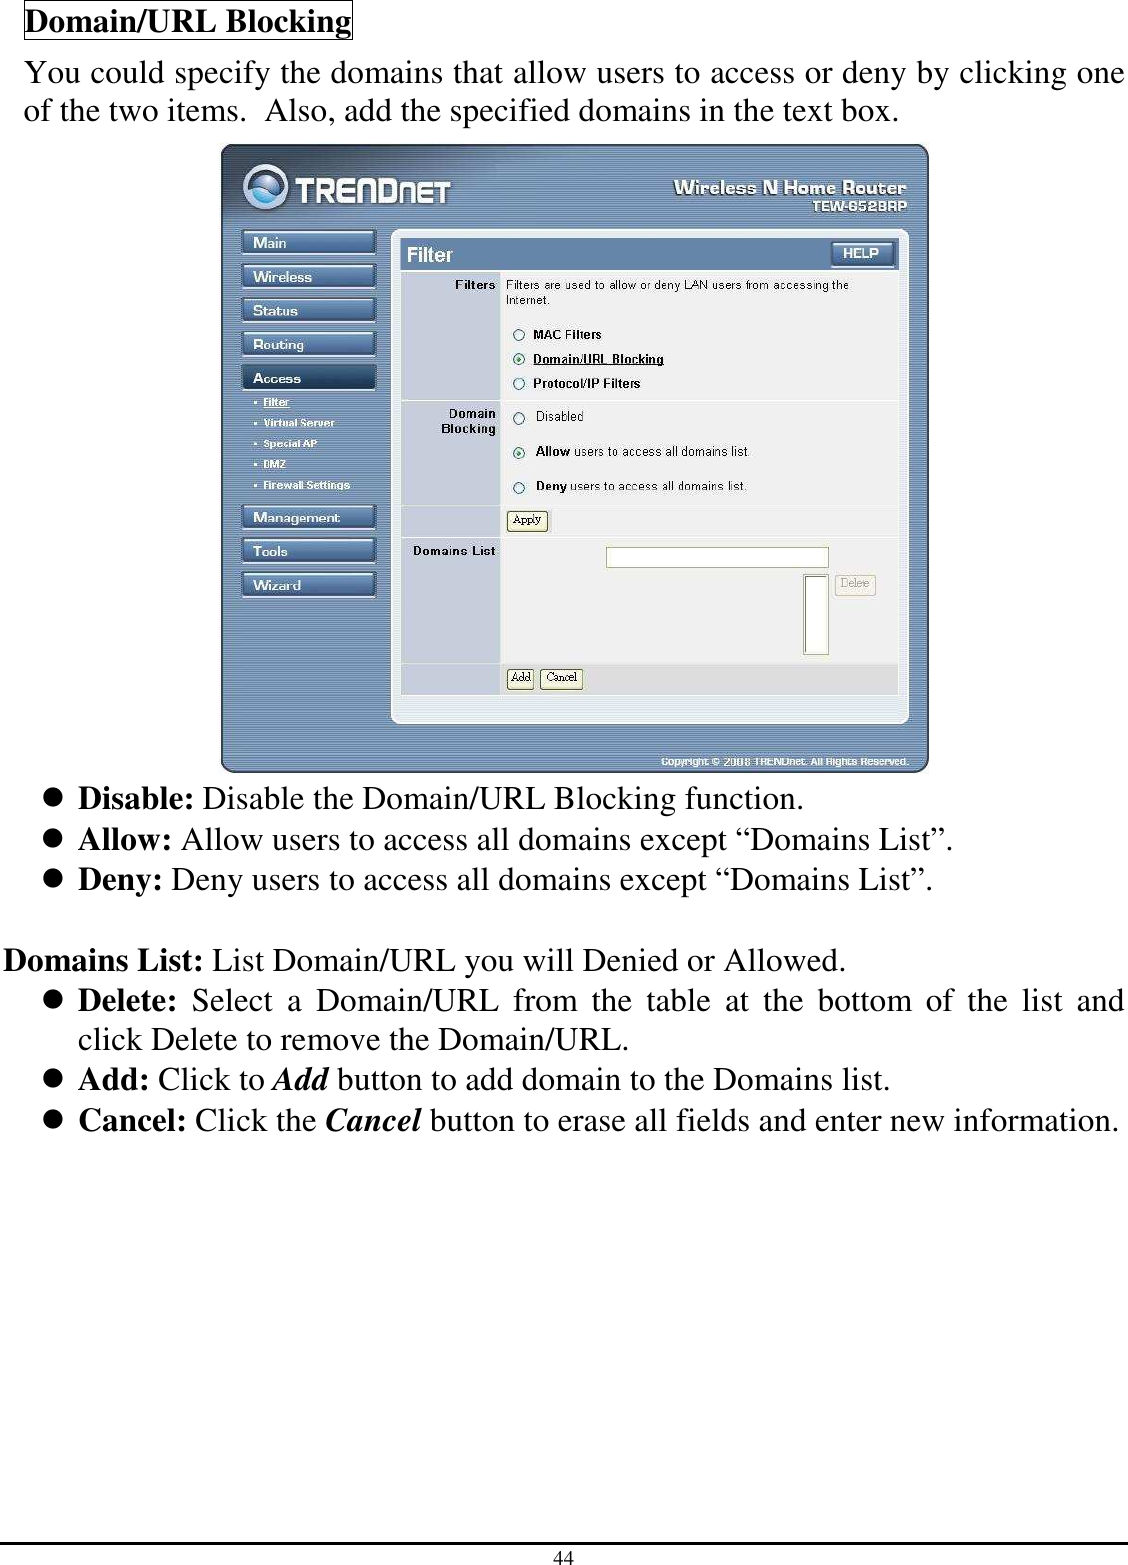 44 Domain/URL Blocking You could specify the domains that allow users to access or deny by clicking one of the two items.  Also, add the specified domains in the text box.   Disable: Disable the Domain/URL Blocking function.  Allow: Allow users to access all domains except “Domains List”.  Deny: Deny users to access all domains except “Domains List”.  Domains List: List Domain/URL you will Denied or Allowed.  Delete:  Select  a  Domain/URL  from  the  table  at  the  bottom  of  the  list  and click Delete to remove the Domain/URL.  Add: Click to Add button to add domain to the Domains list.  Cancel: Click the Cancel button to erase all fields and enter new information. 